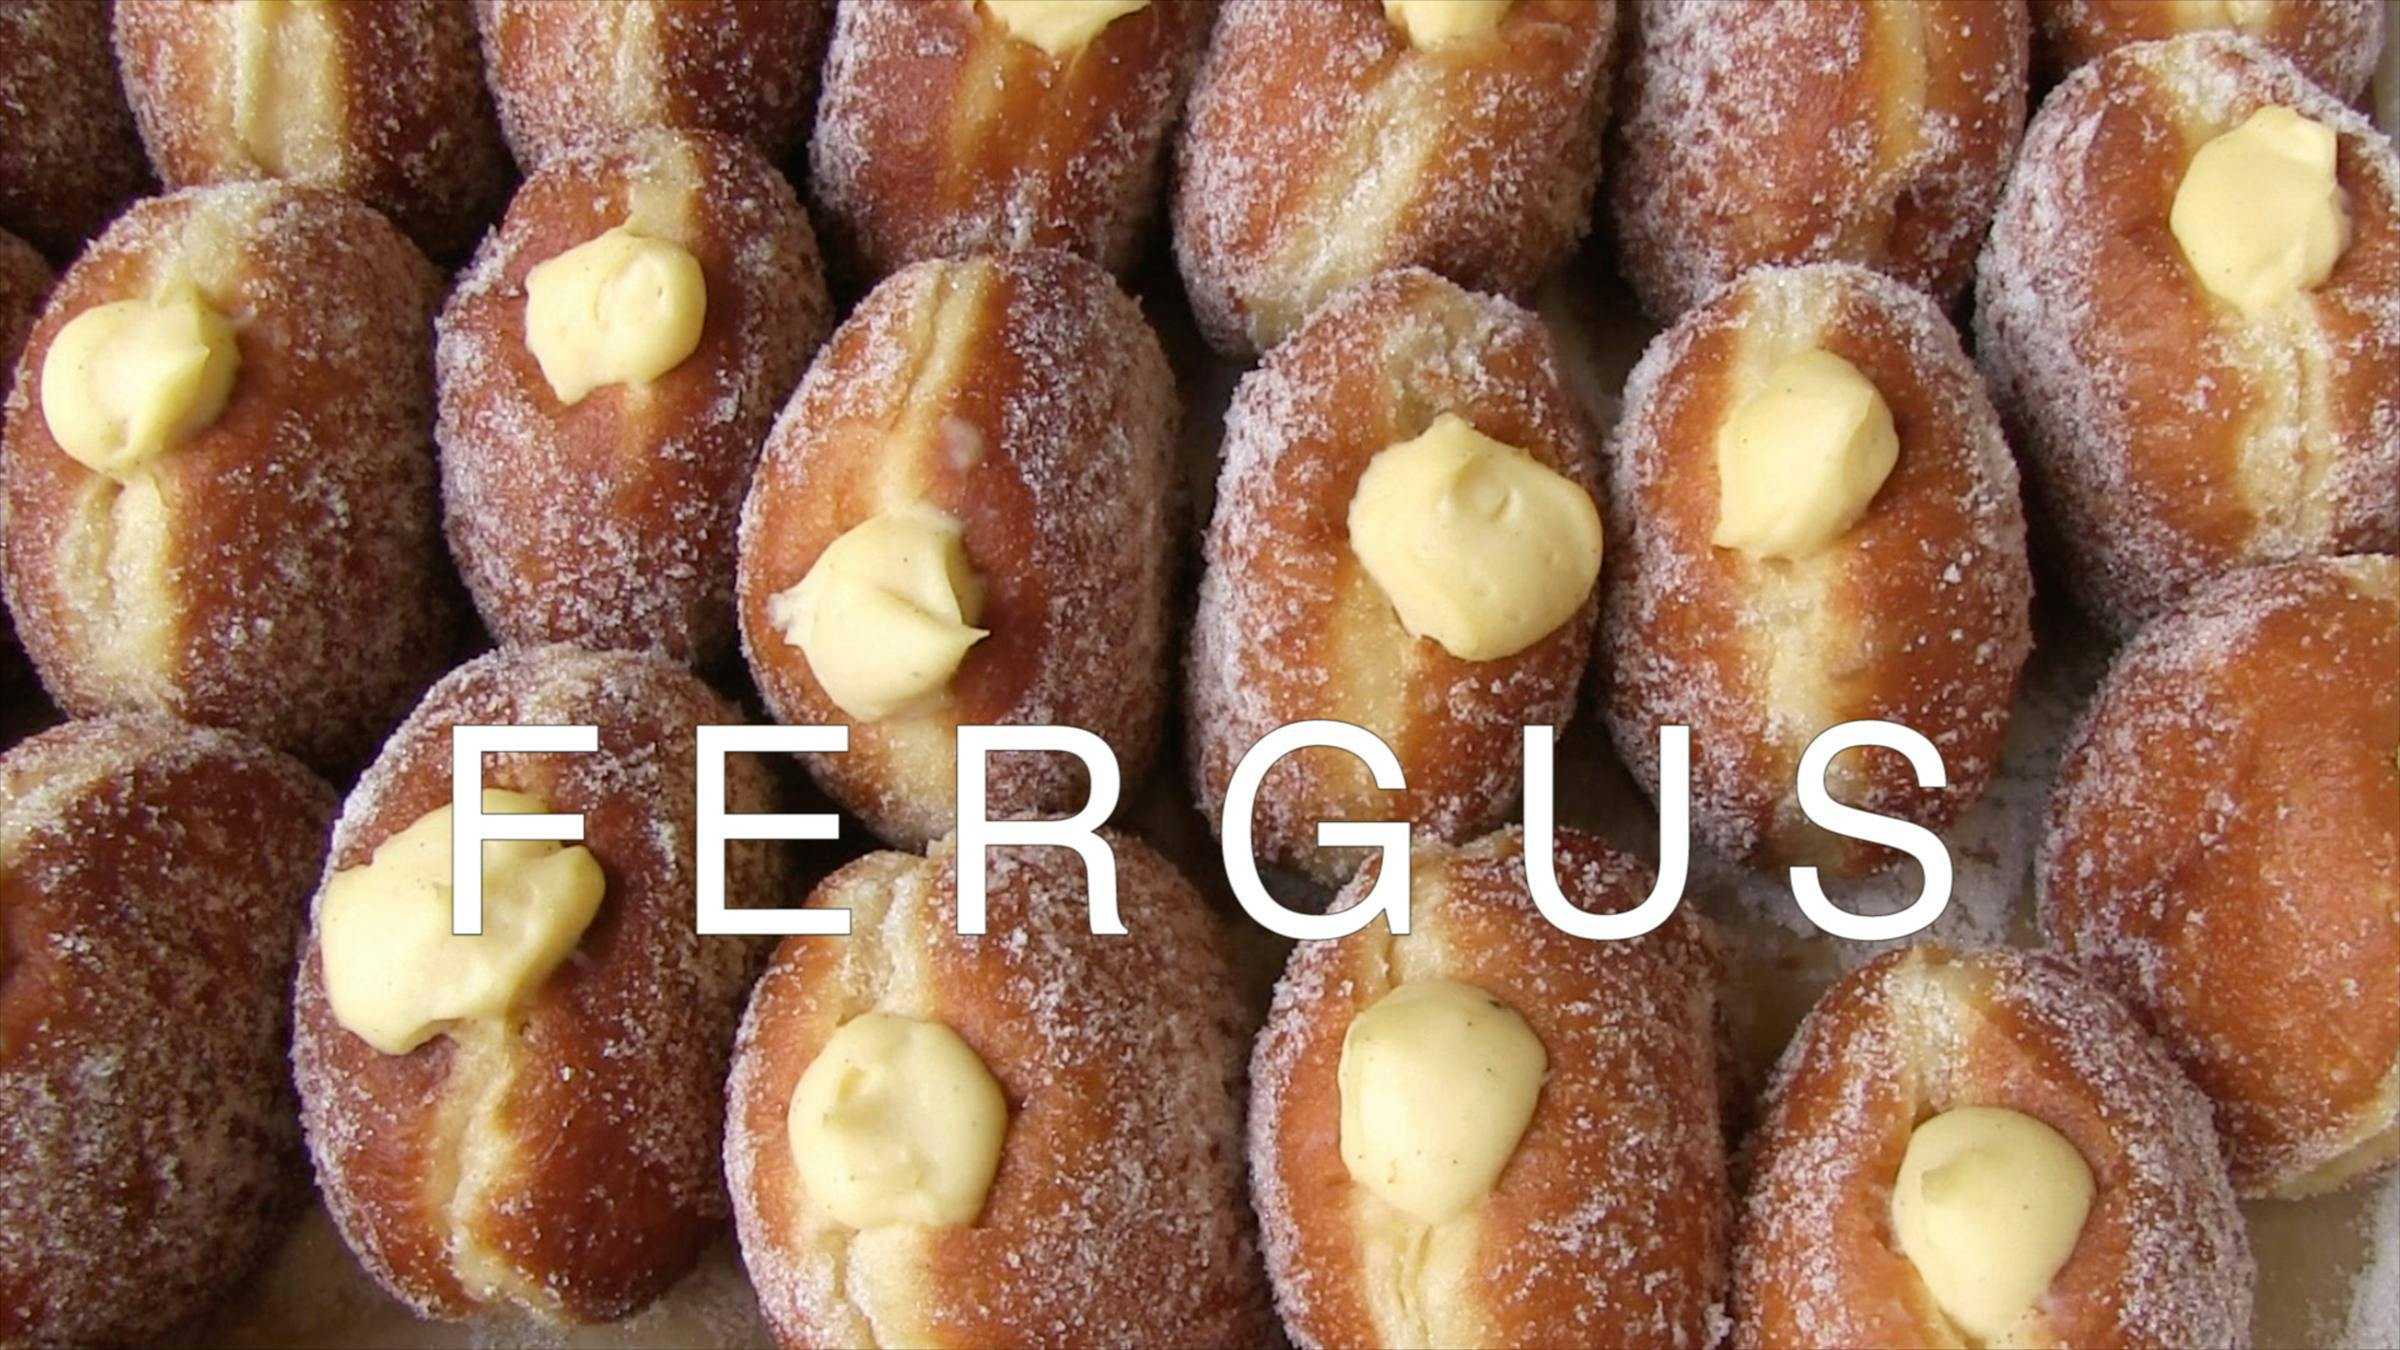 Image of lots of sugar-coated donuts lined up next to each other with custard coming out. The word 'FERGUS' is superimposed on top.